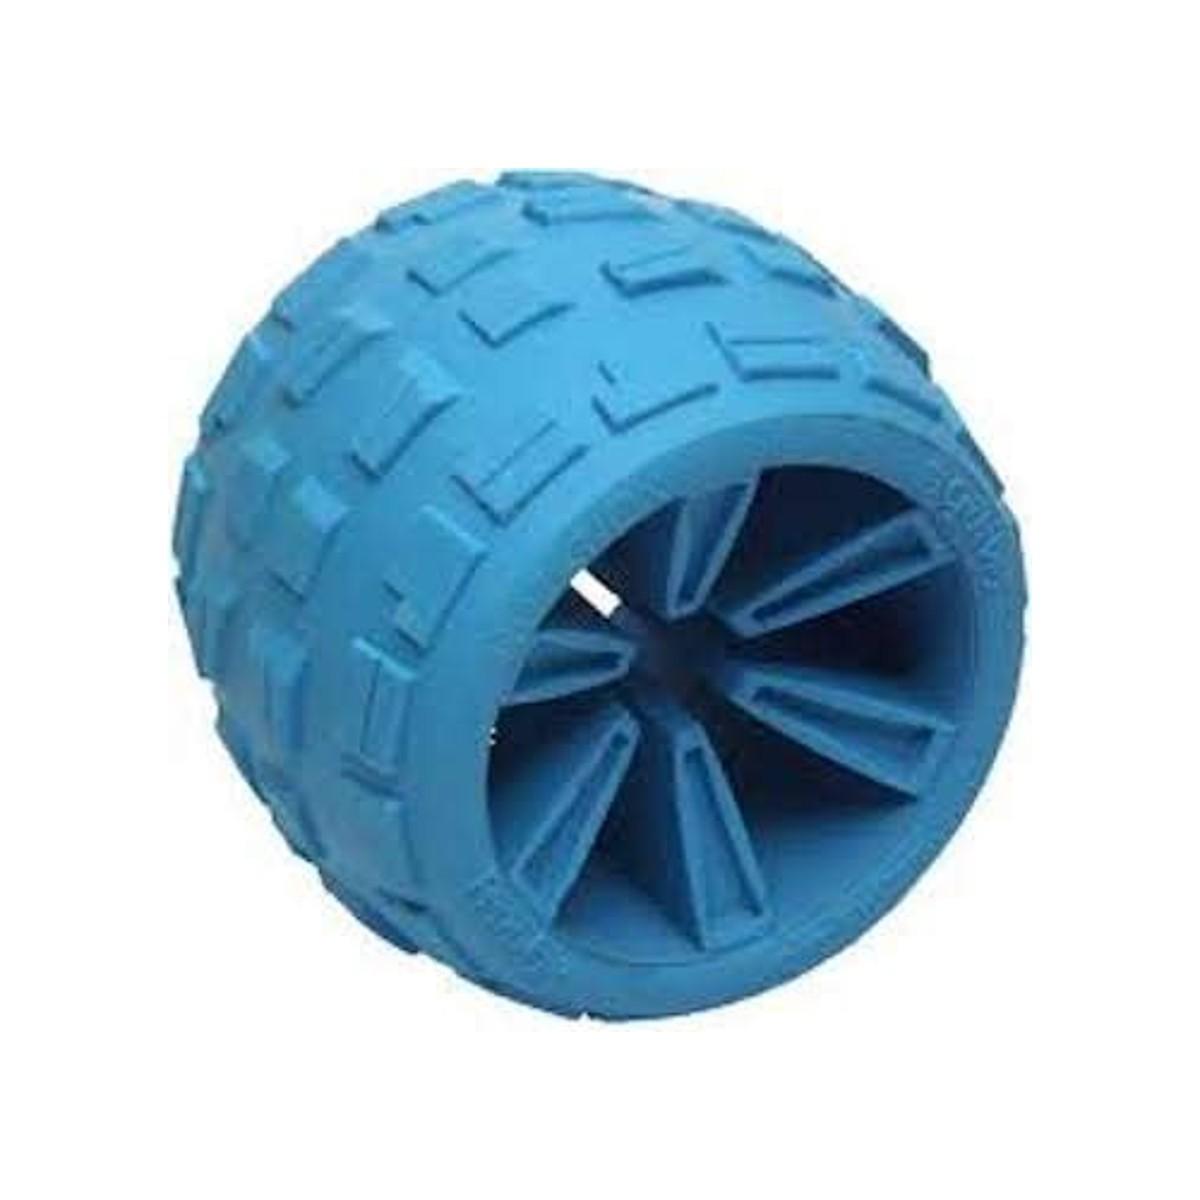 Cycle Dog High Roller Plus Ball Dog Toy - Blue